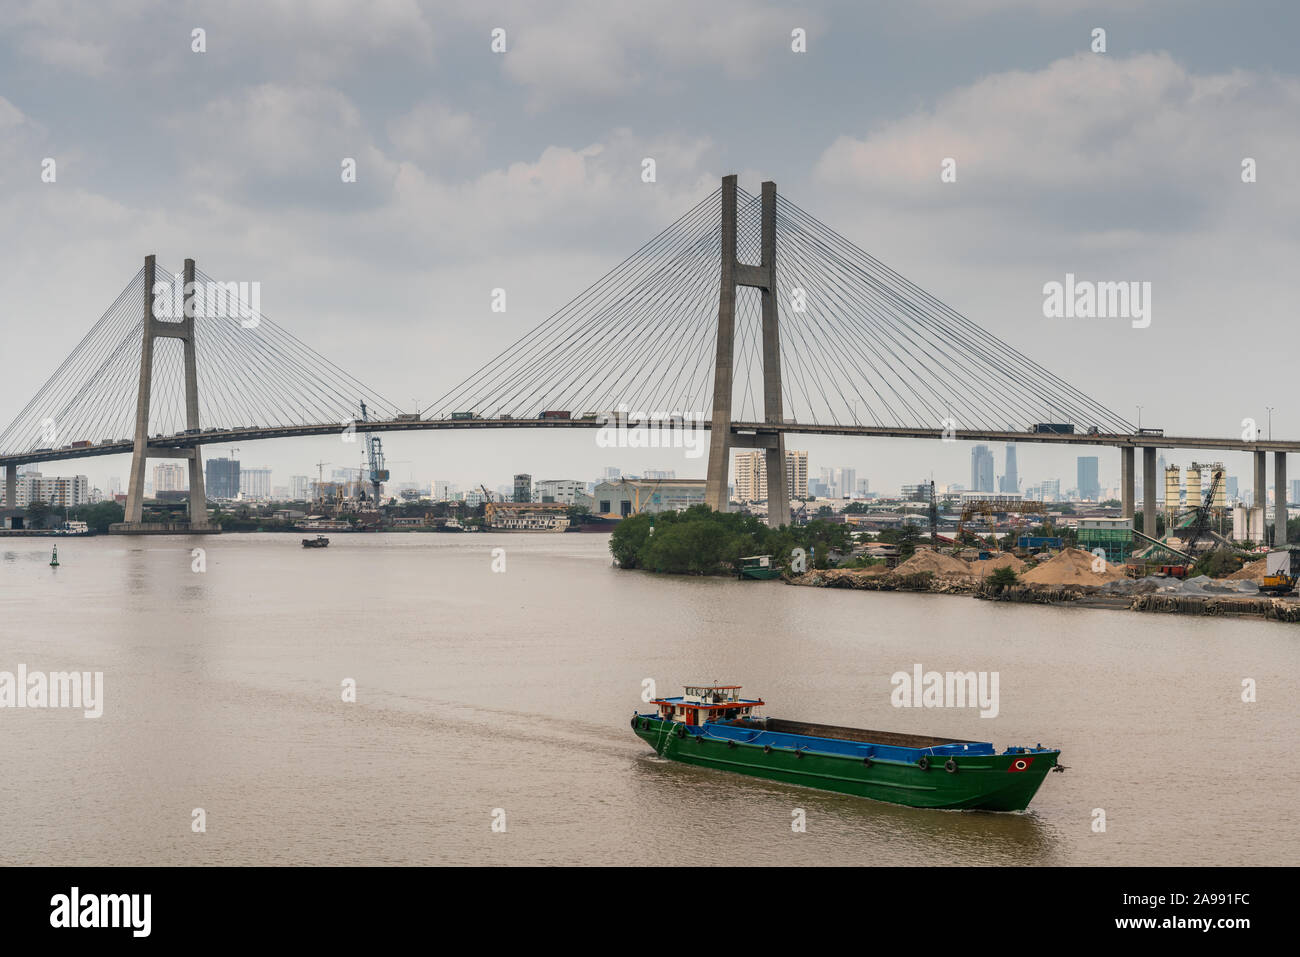 Ho Chi Minh City, Vietnam - March 12, 2019: Long Tau and song Sai Gon rivers meeting point. H-shaped pylons and road of Phu My suspension bridge under Stock Photo